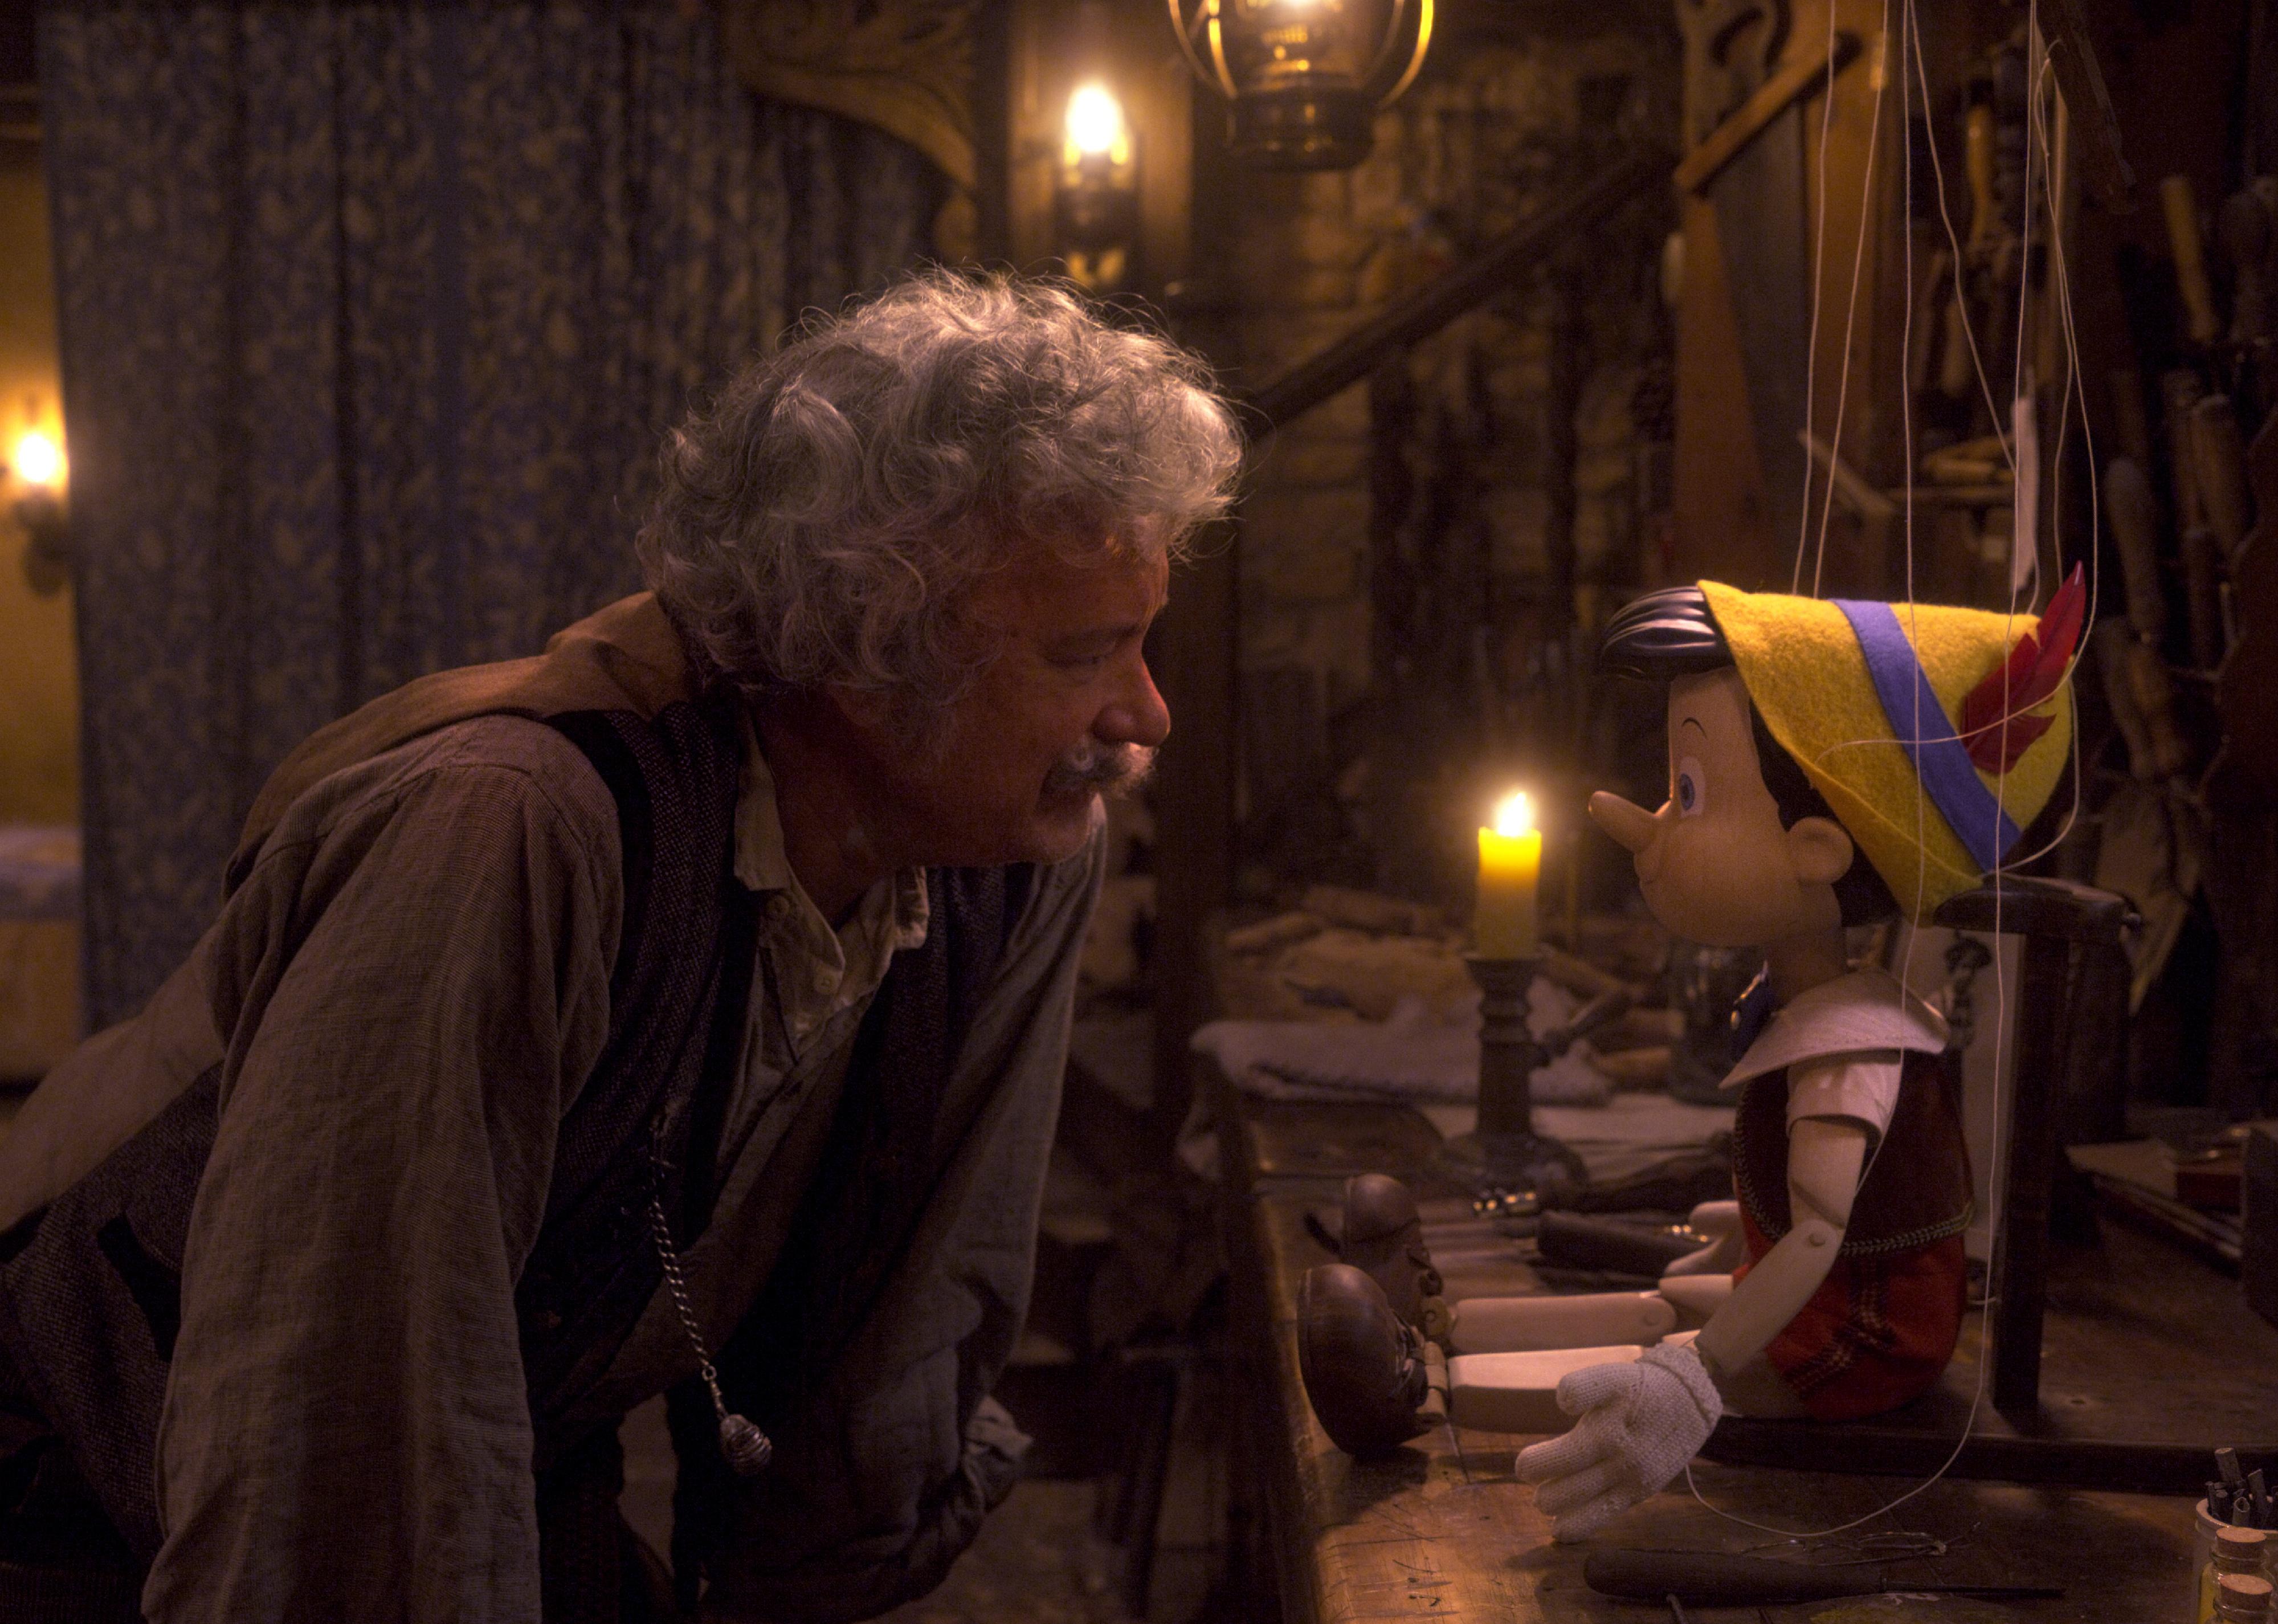 An older man (Tom Hanks as Geppetto) leaning over a table to look at a puppet of a little boy (Pinocchio).